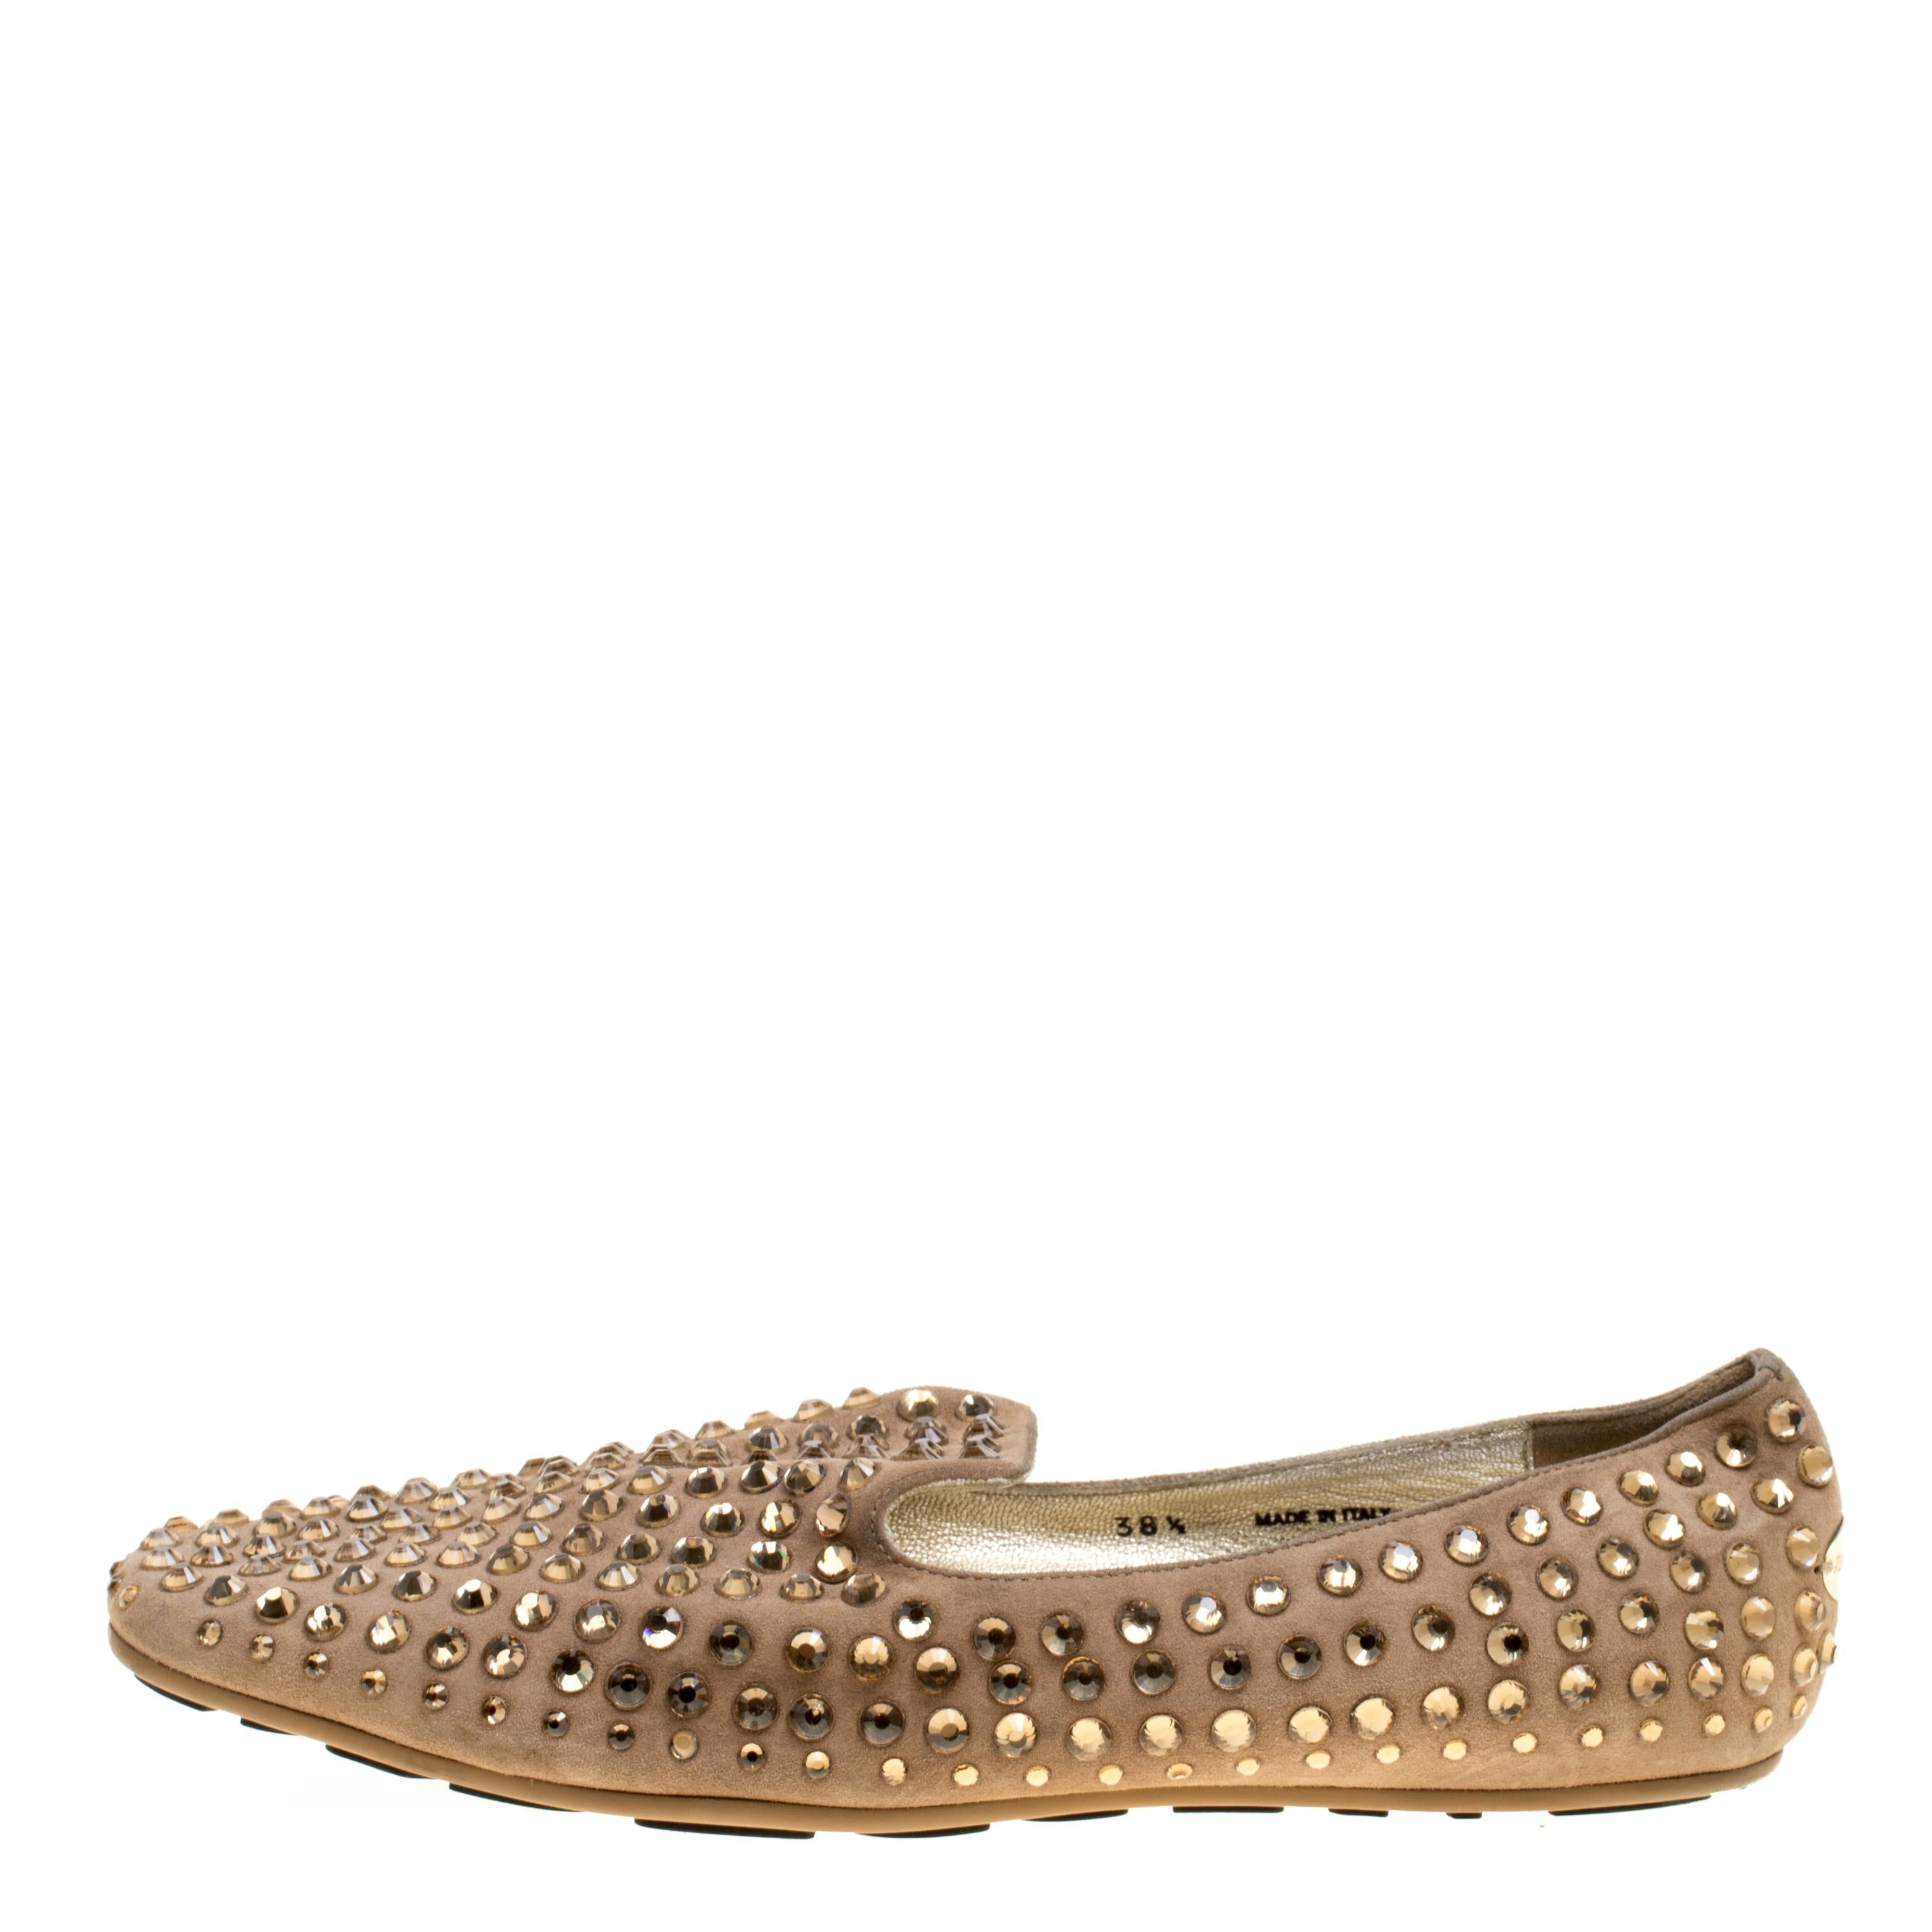 To perfectly complement your attires, Jimmy Choo brings you this pair of smoking slippers that speak nothing but beauty. They've been fabulously crafted in beige suede with intriguing crystal embellishments all over that lend an elegant touch to